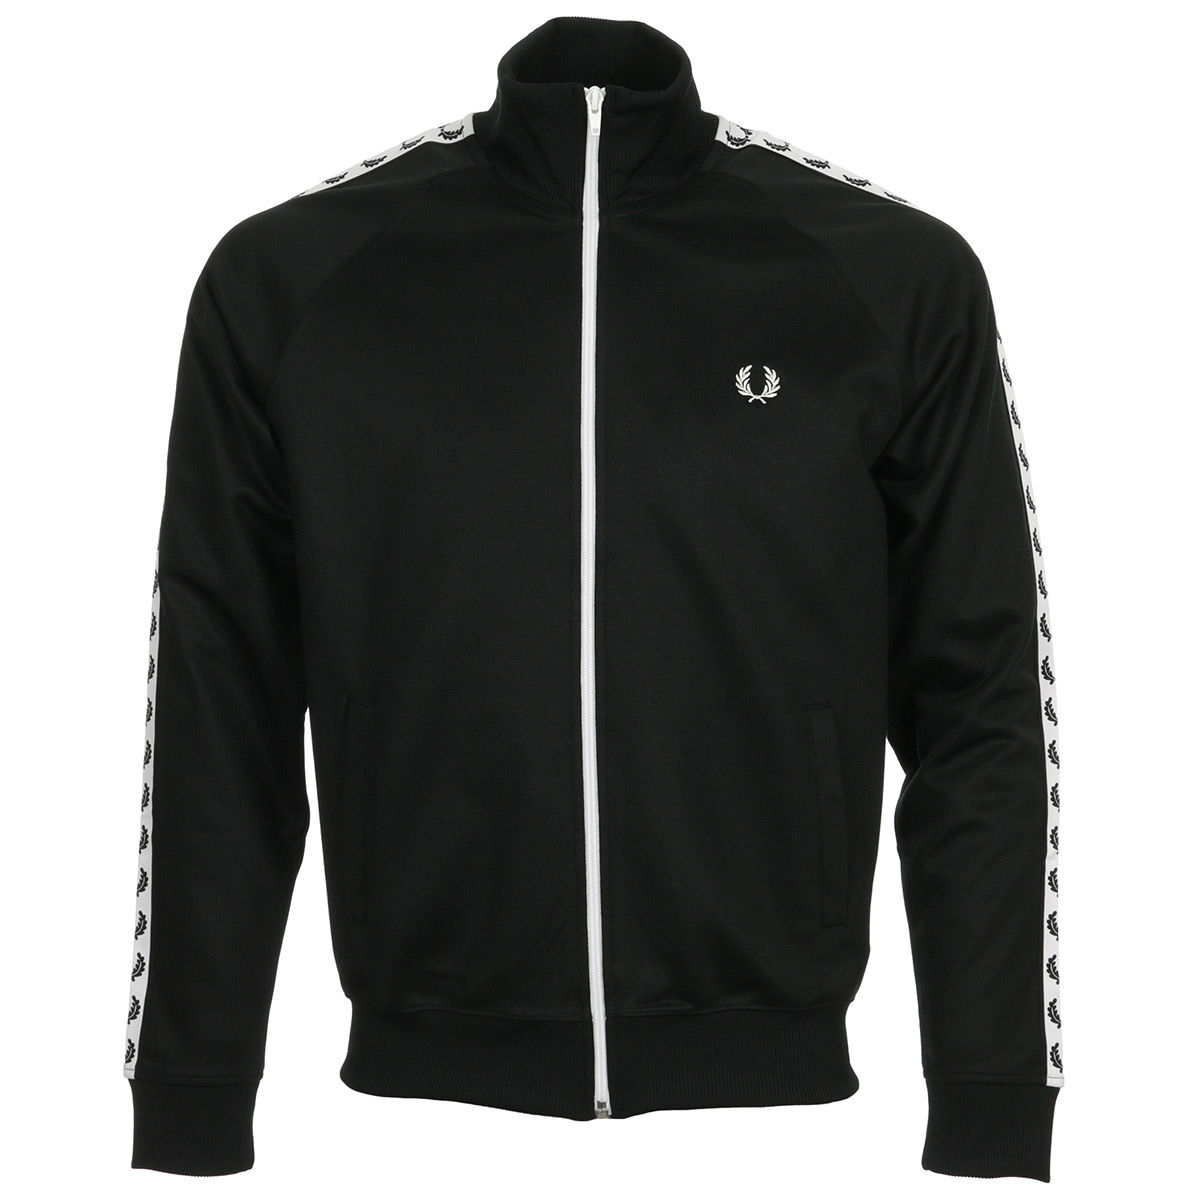 Fred Perry "Taped Track Jacket"